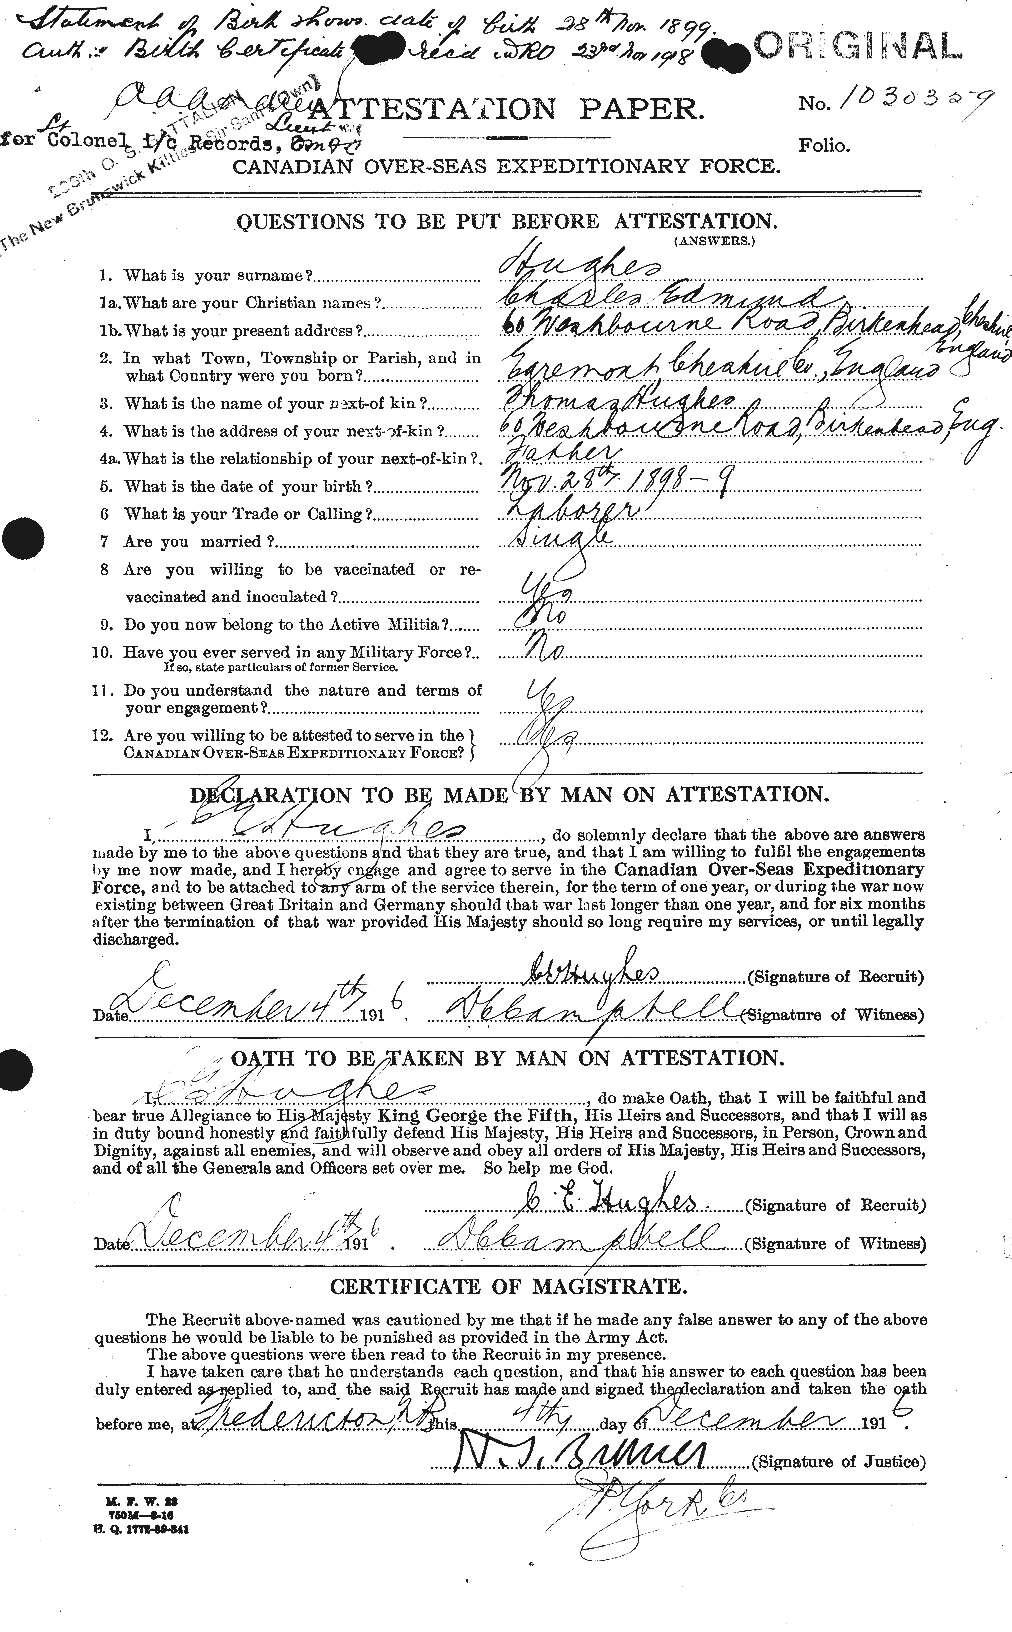 Personnel Records of the First World War - CEF 402604a